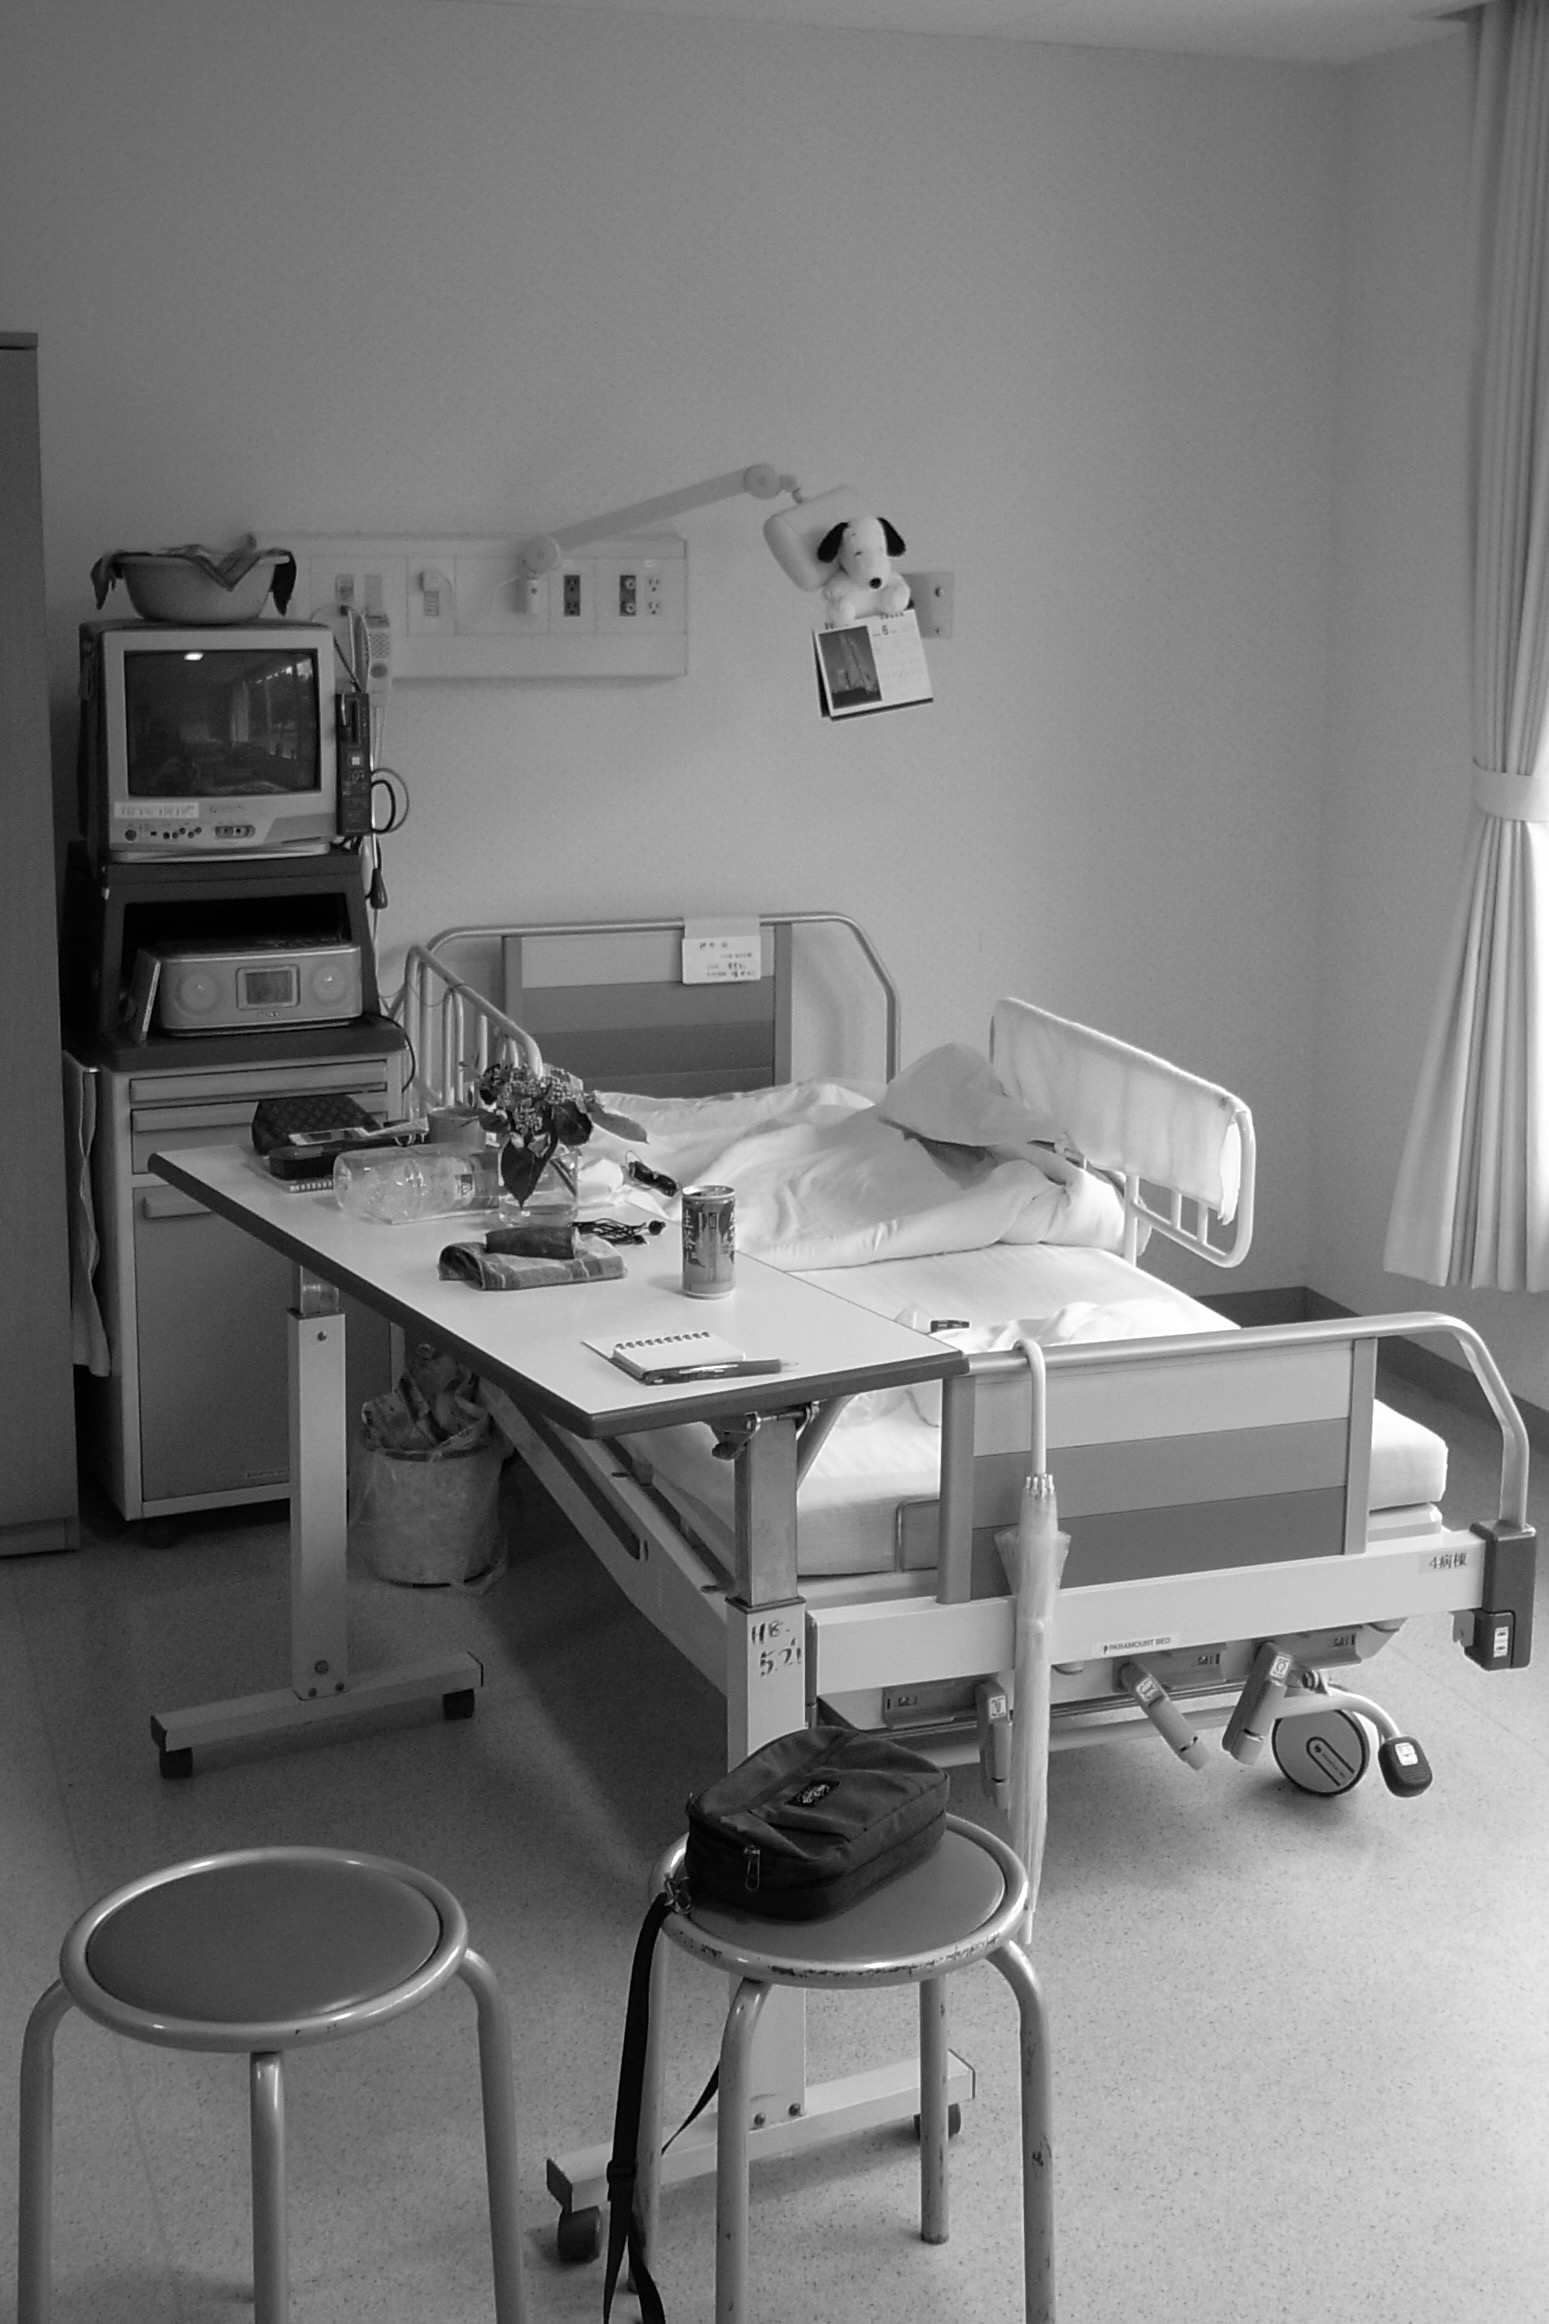 A hospital bed.